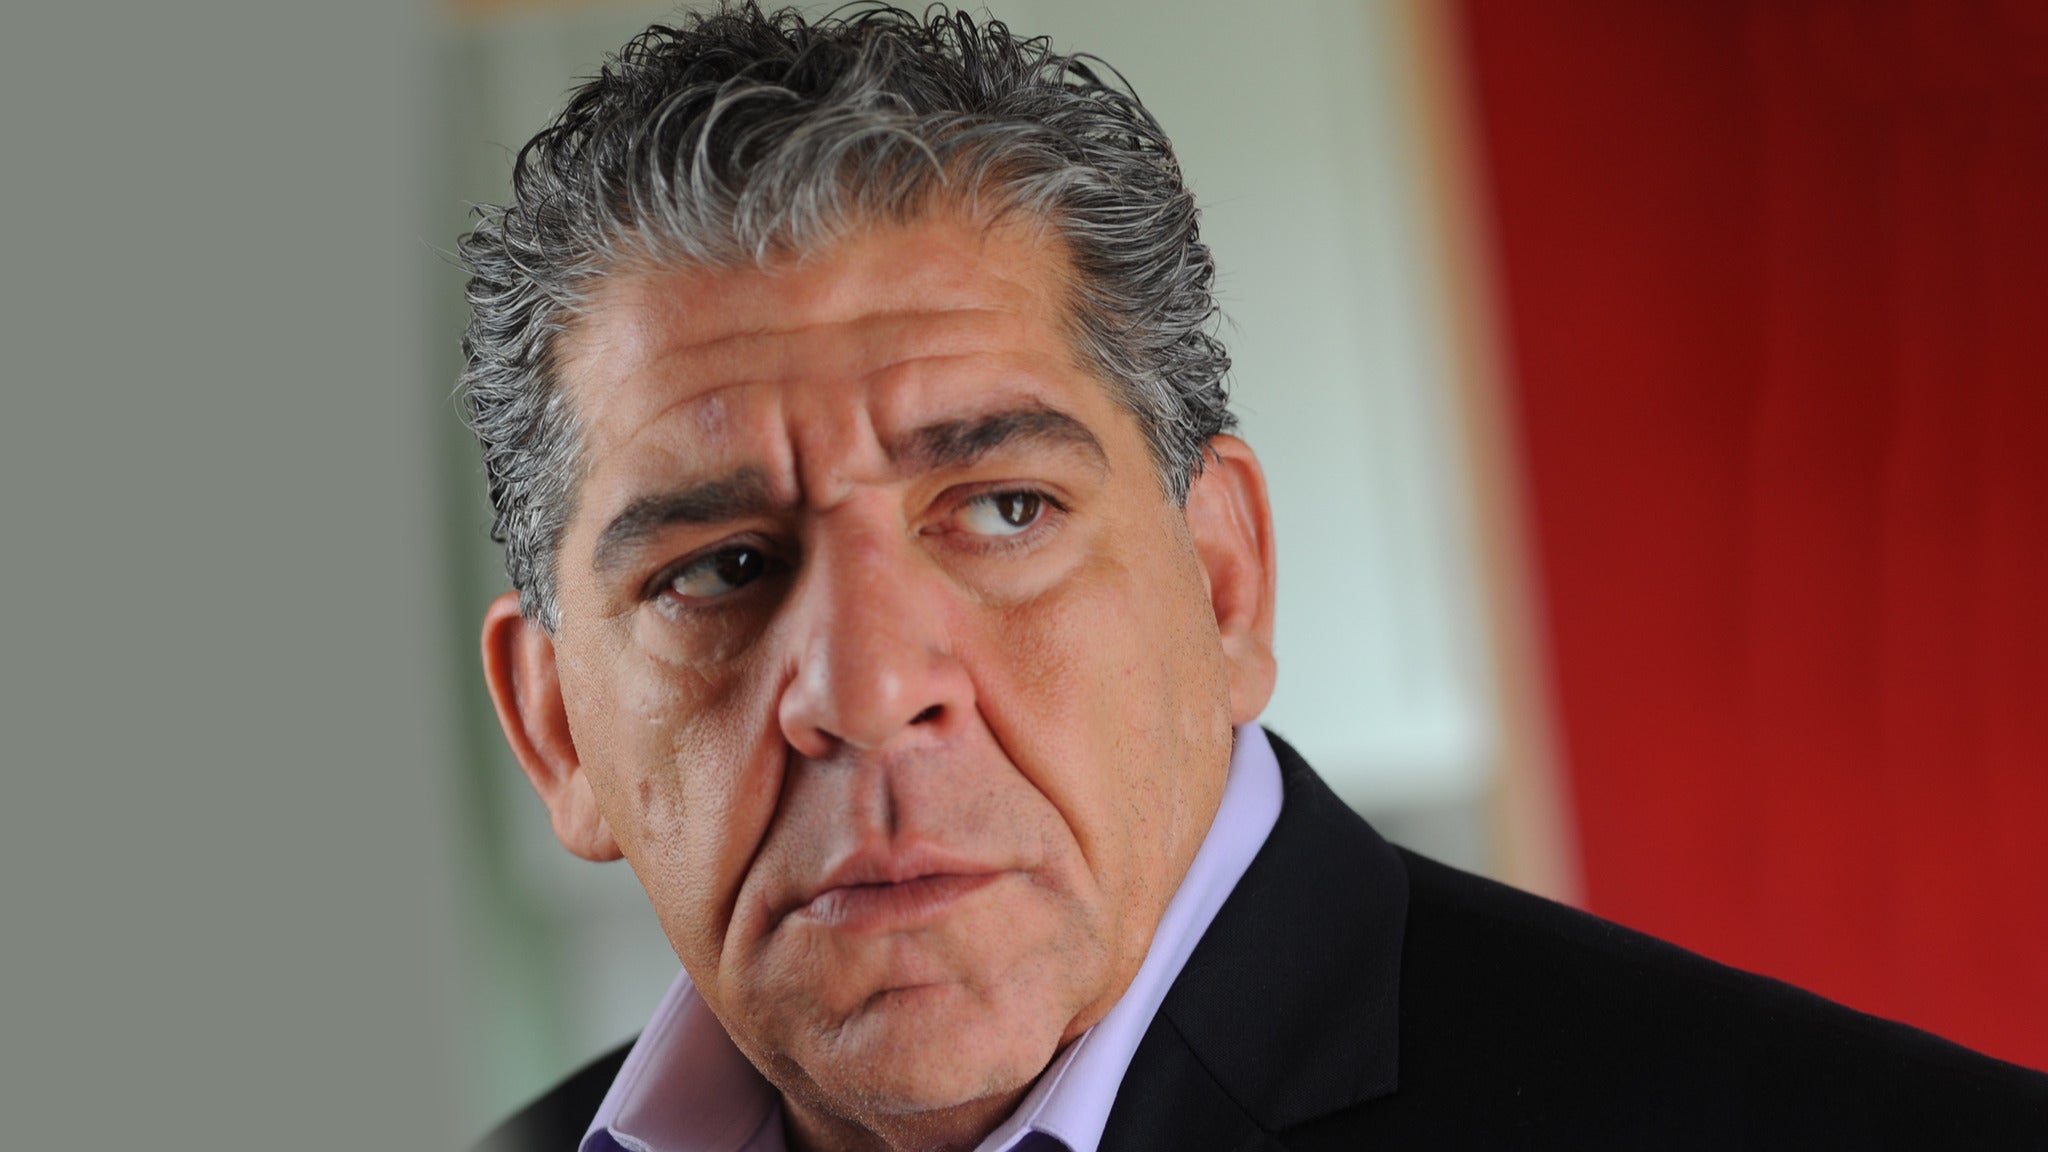 Joey Diaz: The 56 and Still Slinging Dick Tour in San Francisco promo photo for Live Nation presale offer code